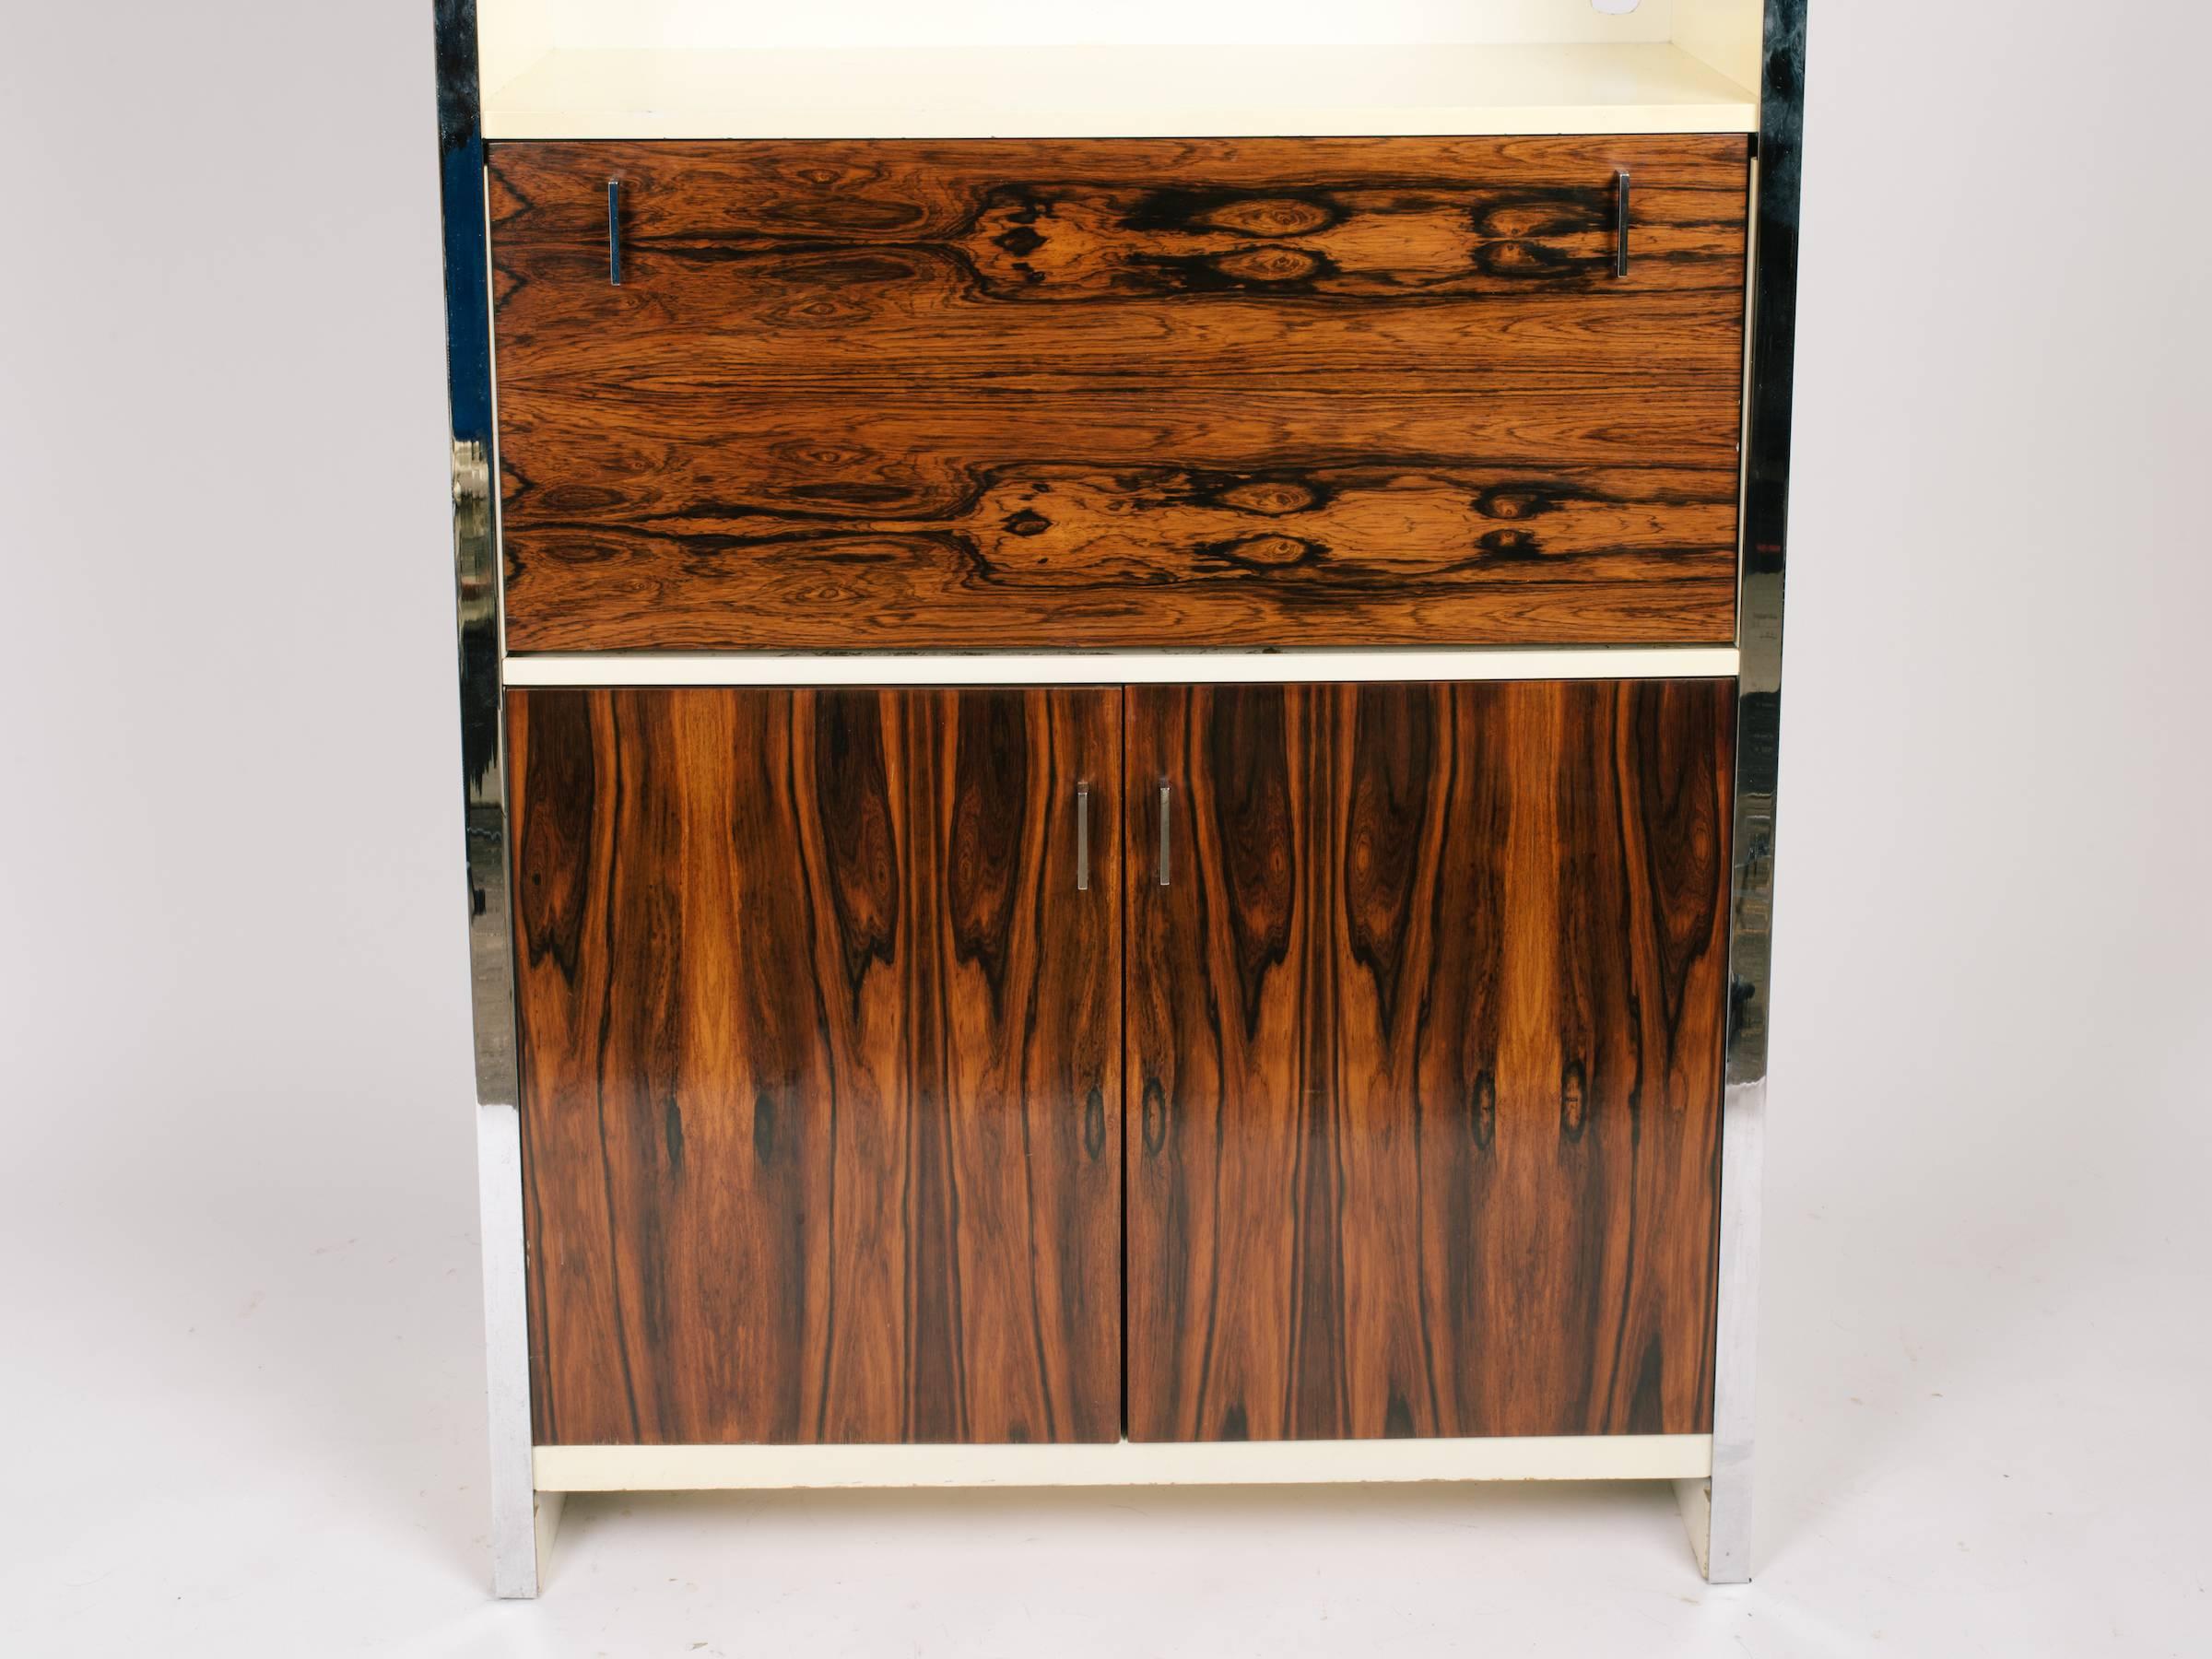 1970s John Stuart cabinet. Rosewood doors, chrome trim. Has a pull down door used either for a desk, or a bar.